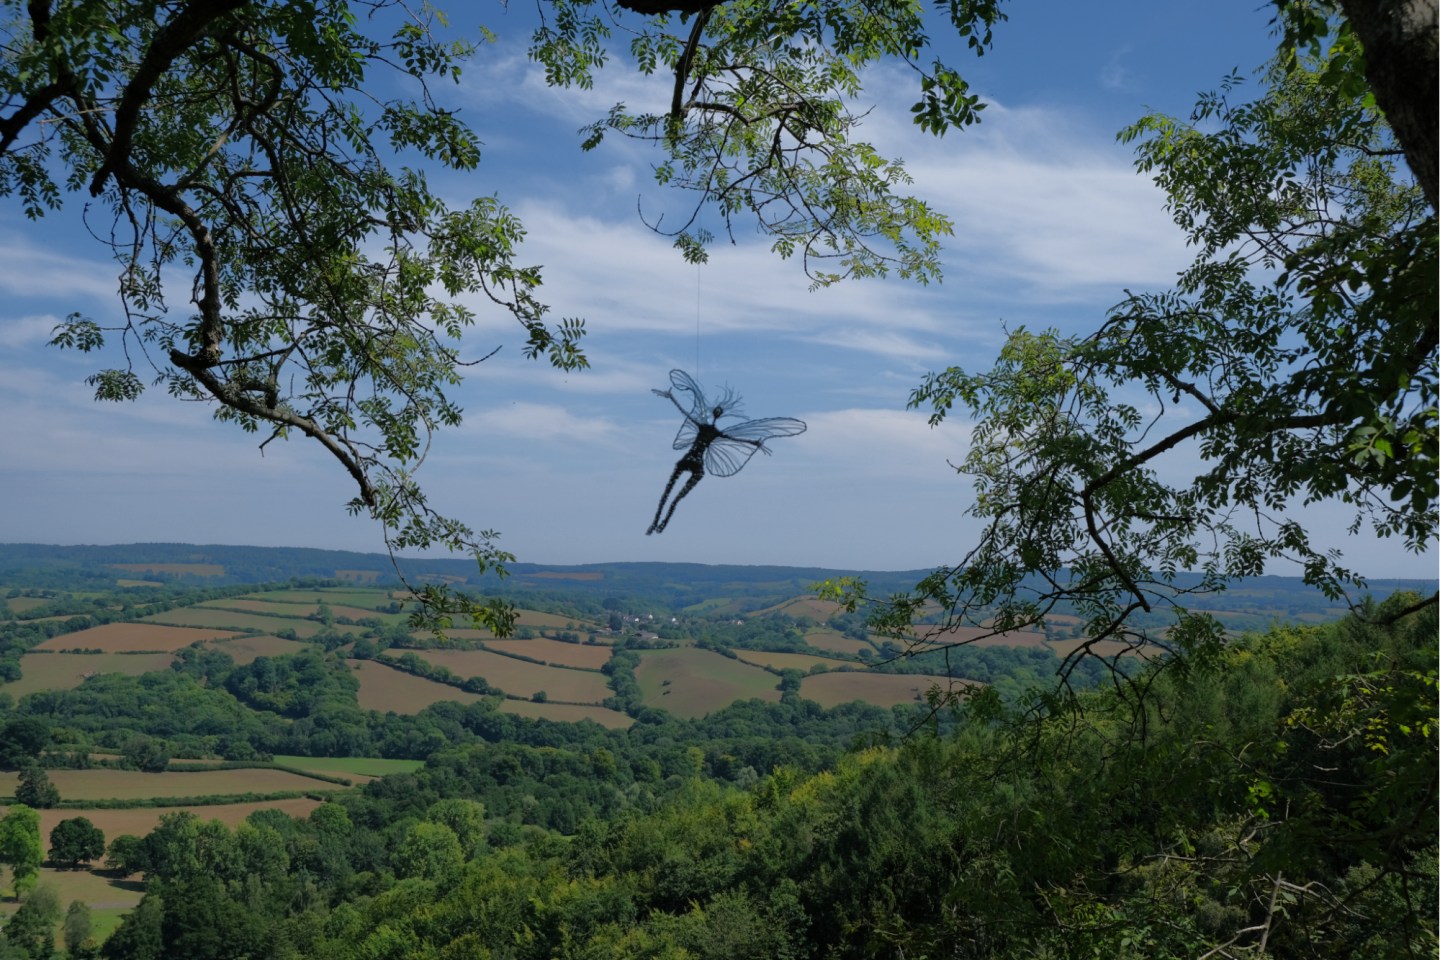 Image of Fairy hanging from the trees showing the views across green hills at Canonteign falls